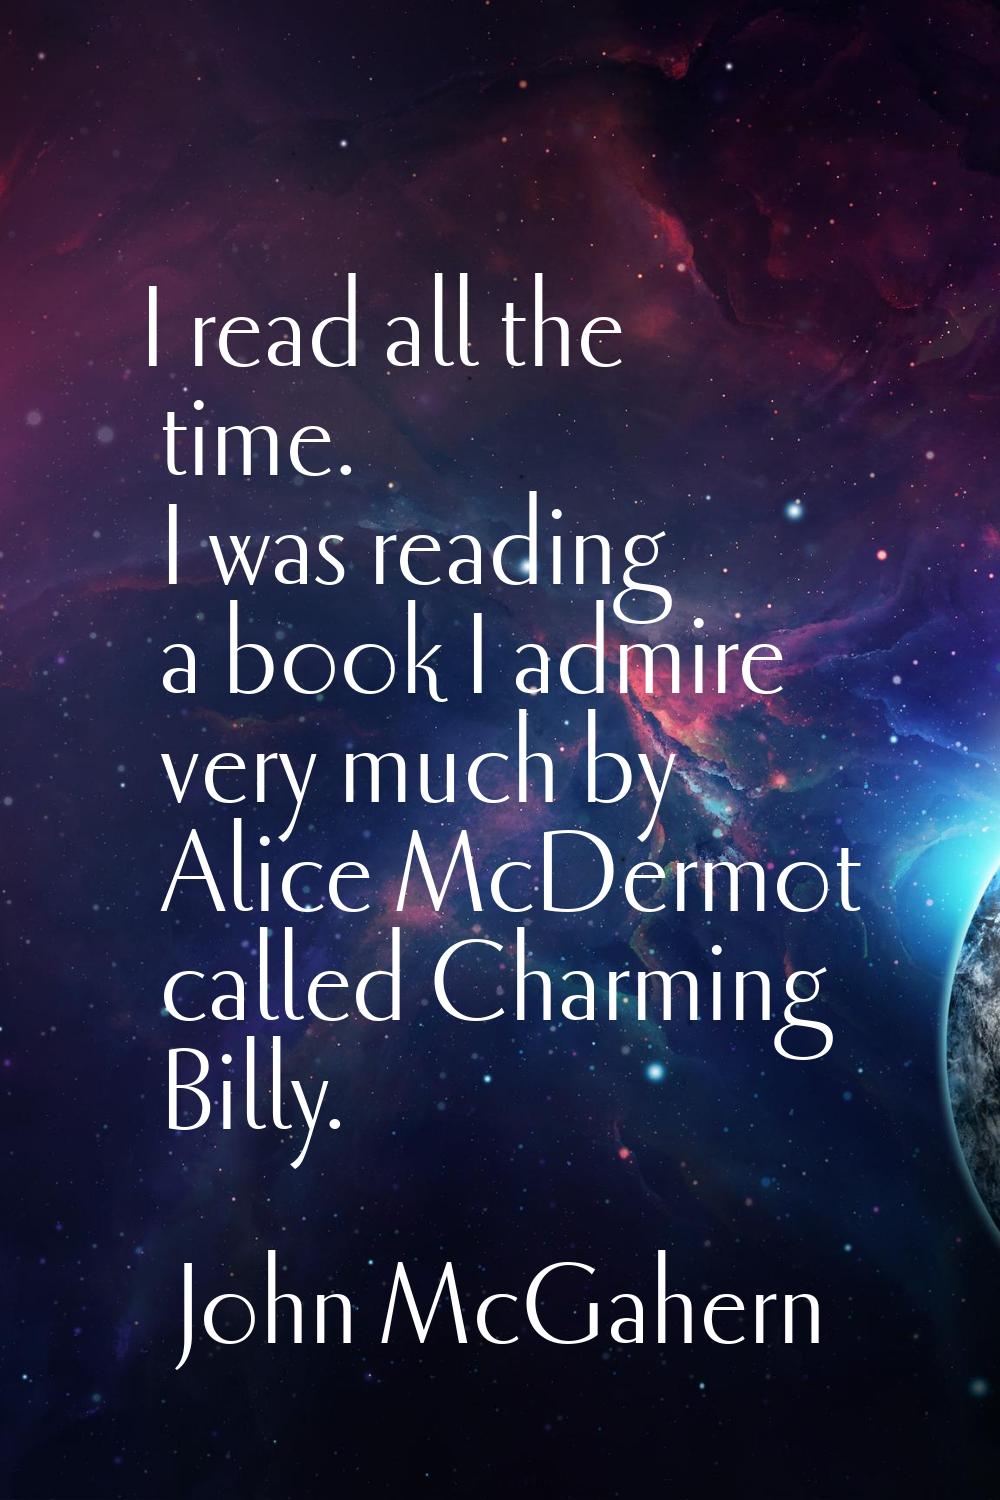 I read all the time. I was reading a book I admire very much by Alice McDermot called Charming Bill